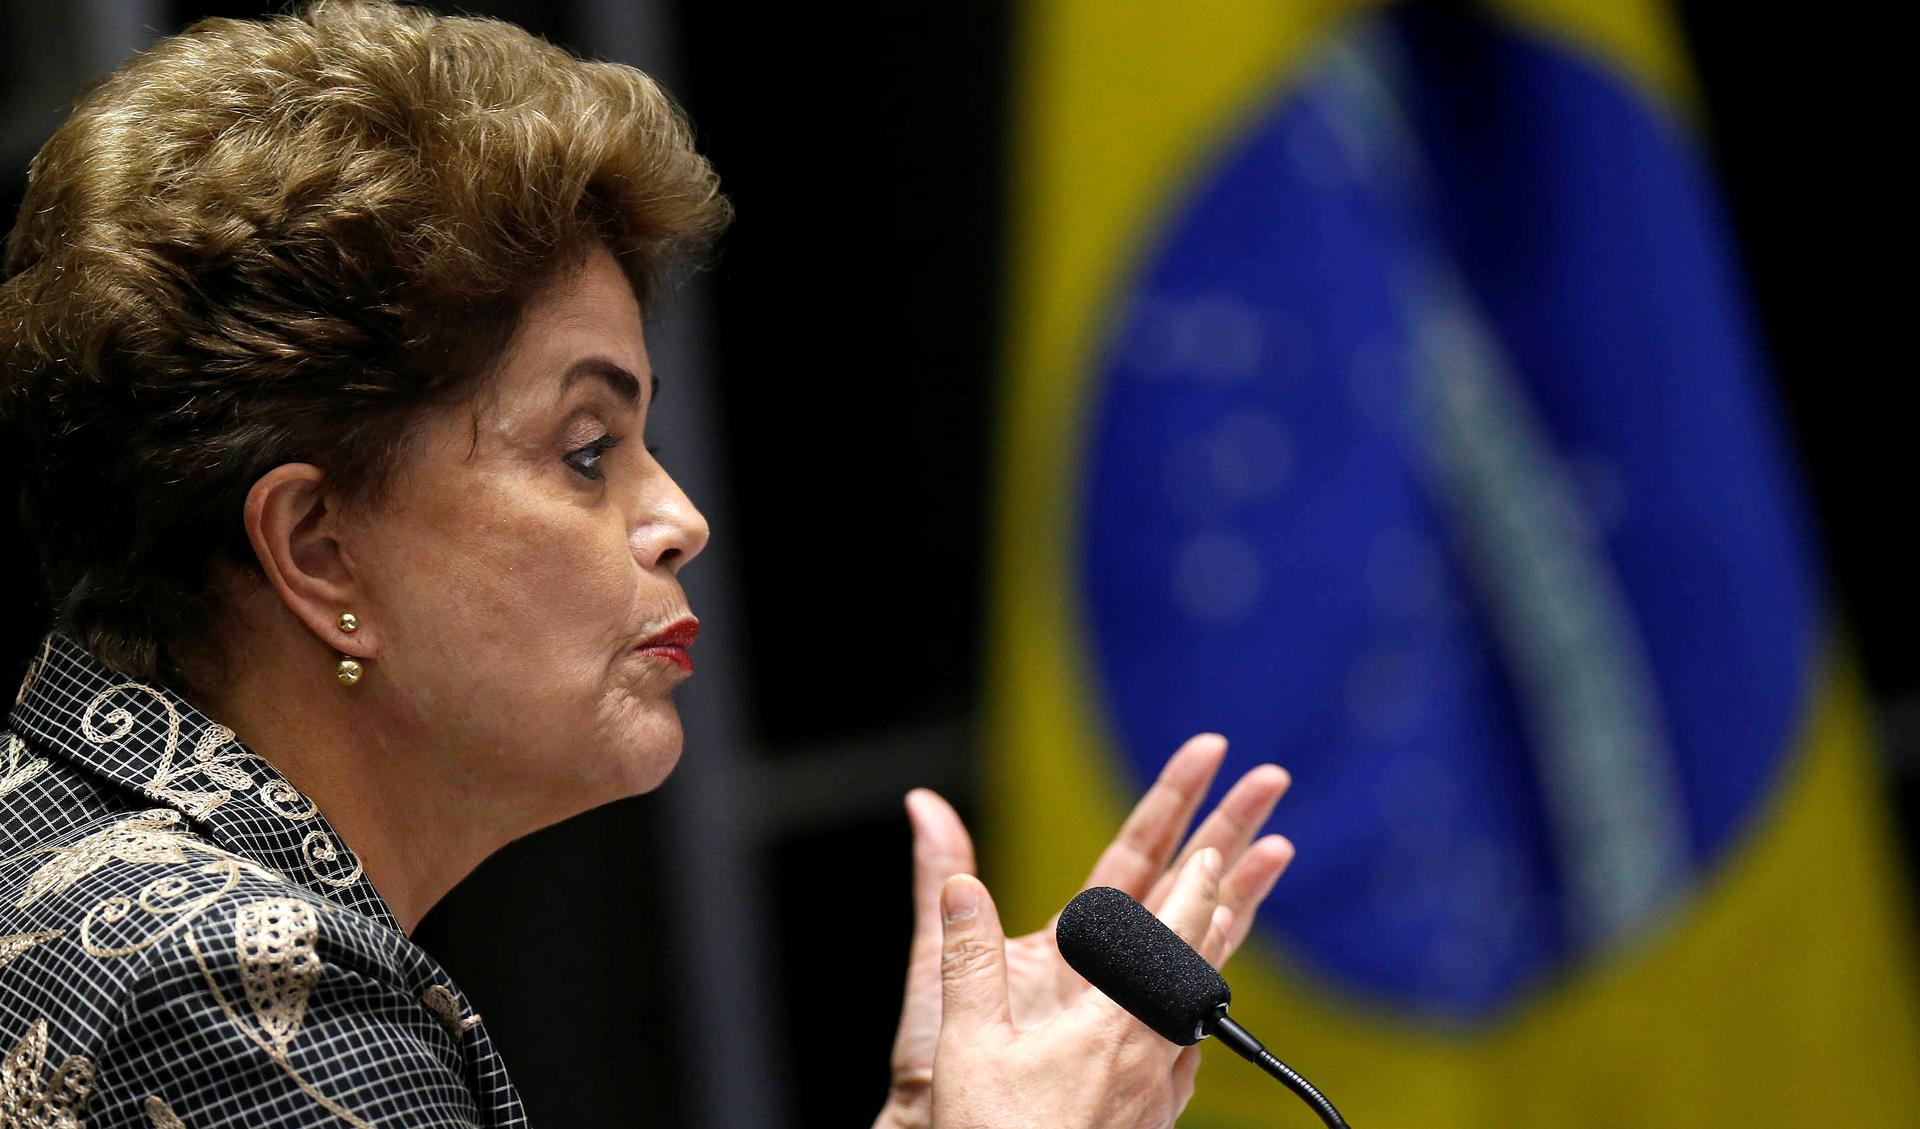 Brazil's suspended President Dilma Rousseff attends Senate on Monday in her final defense before impeachment.